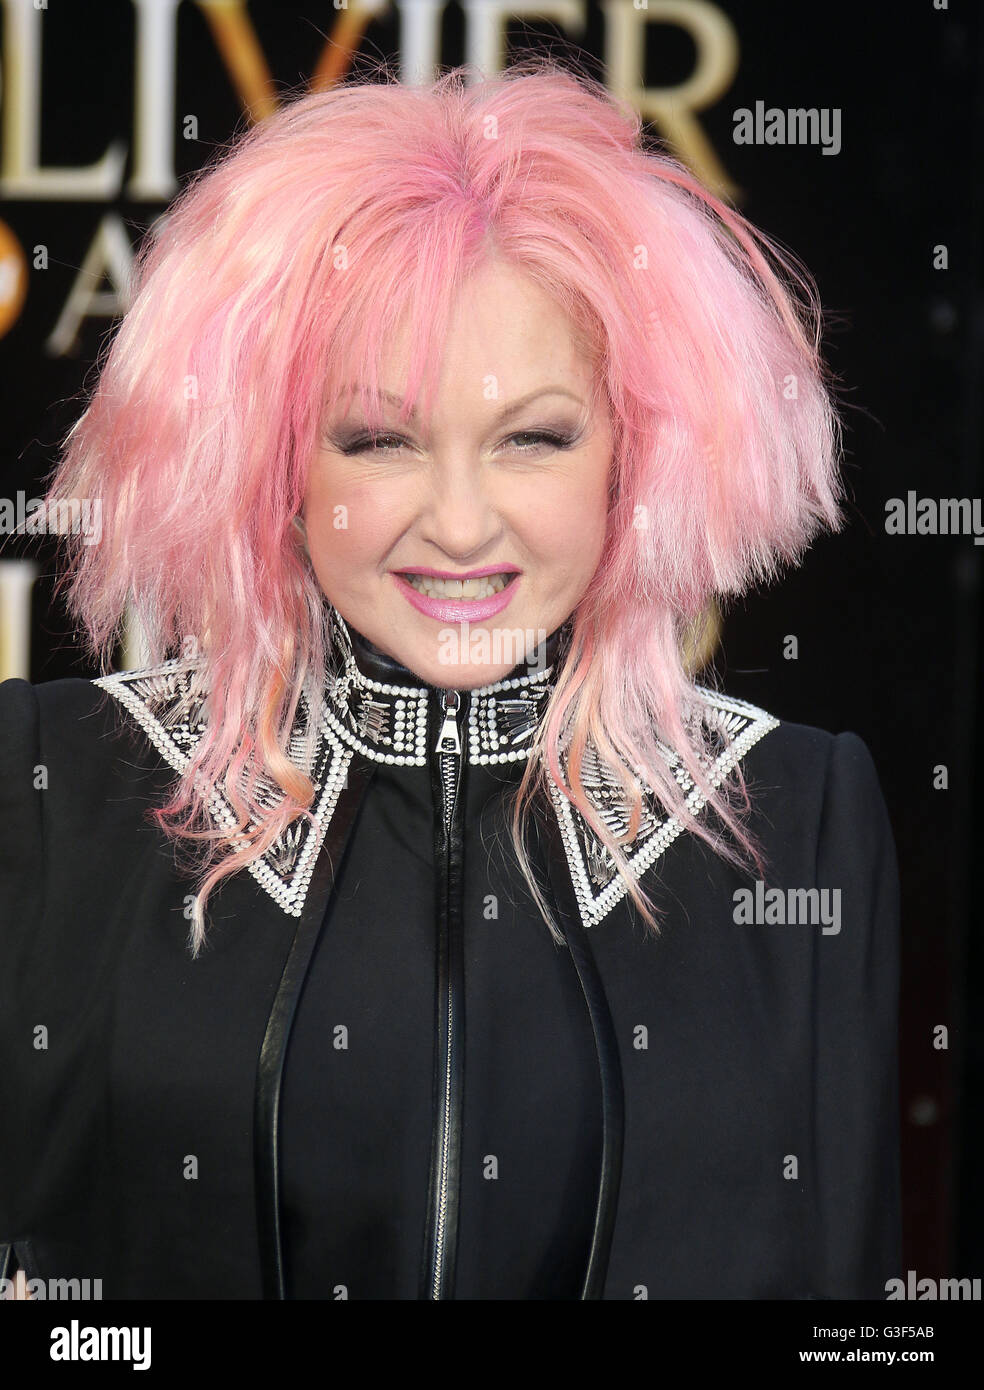 April 3, 2016 - Cyndi Lauper attending The Olivier Awards 2016 at Royal Opera House, Covent Garden in London, UK. Stock Photo